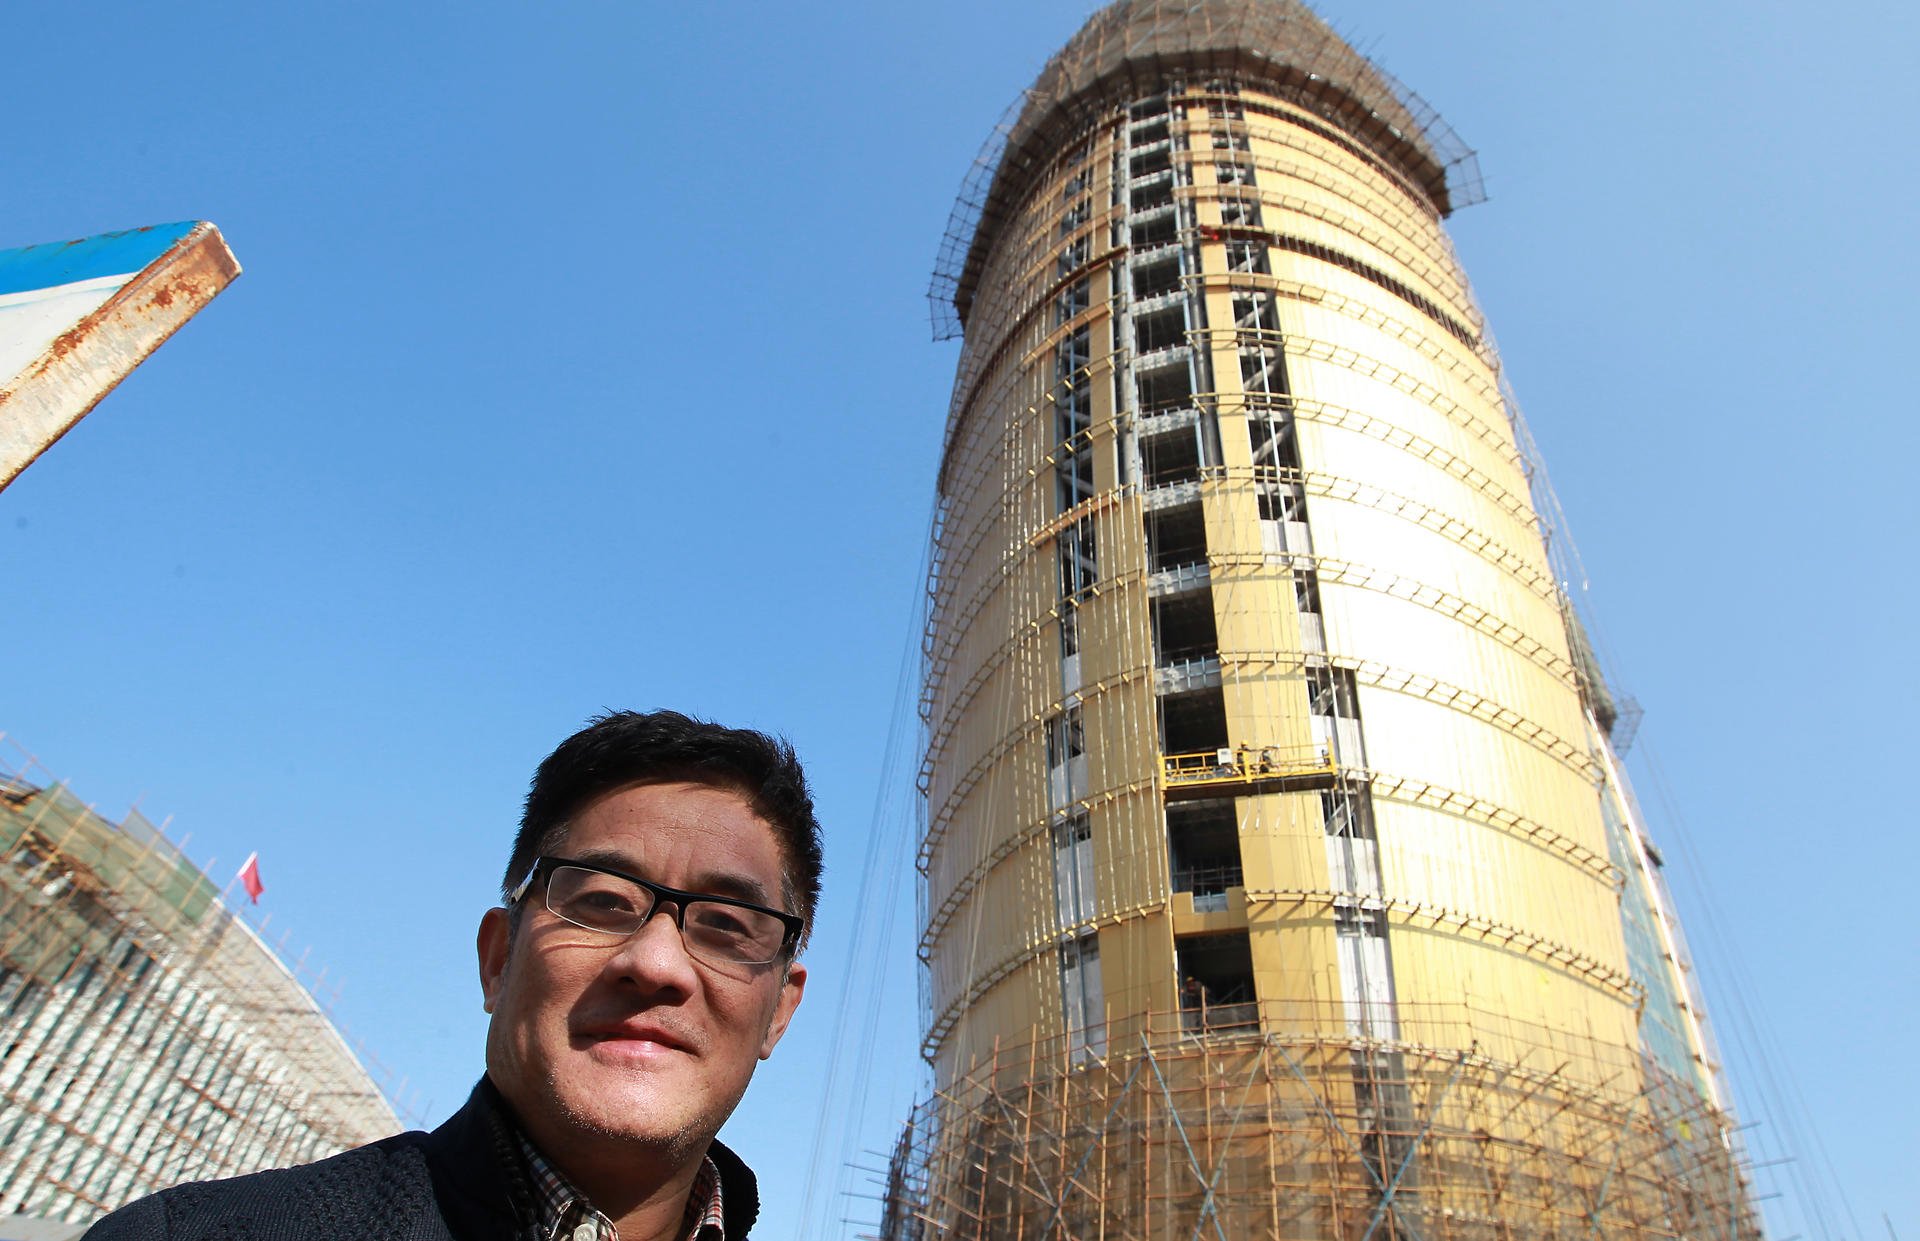 Zhou Qi, chief architect of the People's Daily tower, is proud of his new building in the capital. Photo: Simon Song